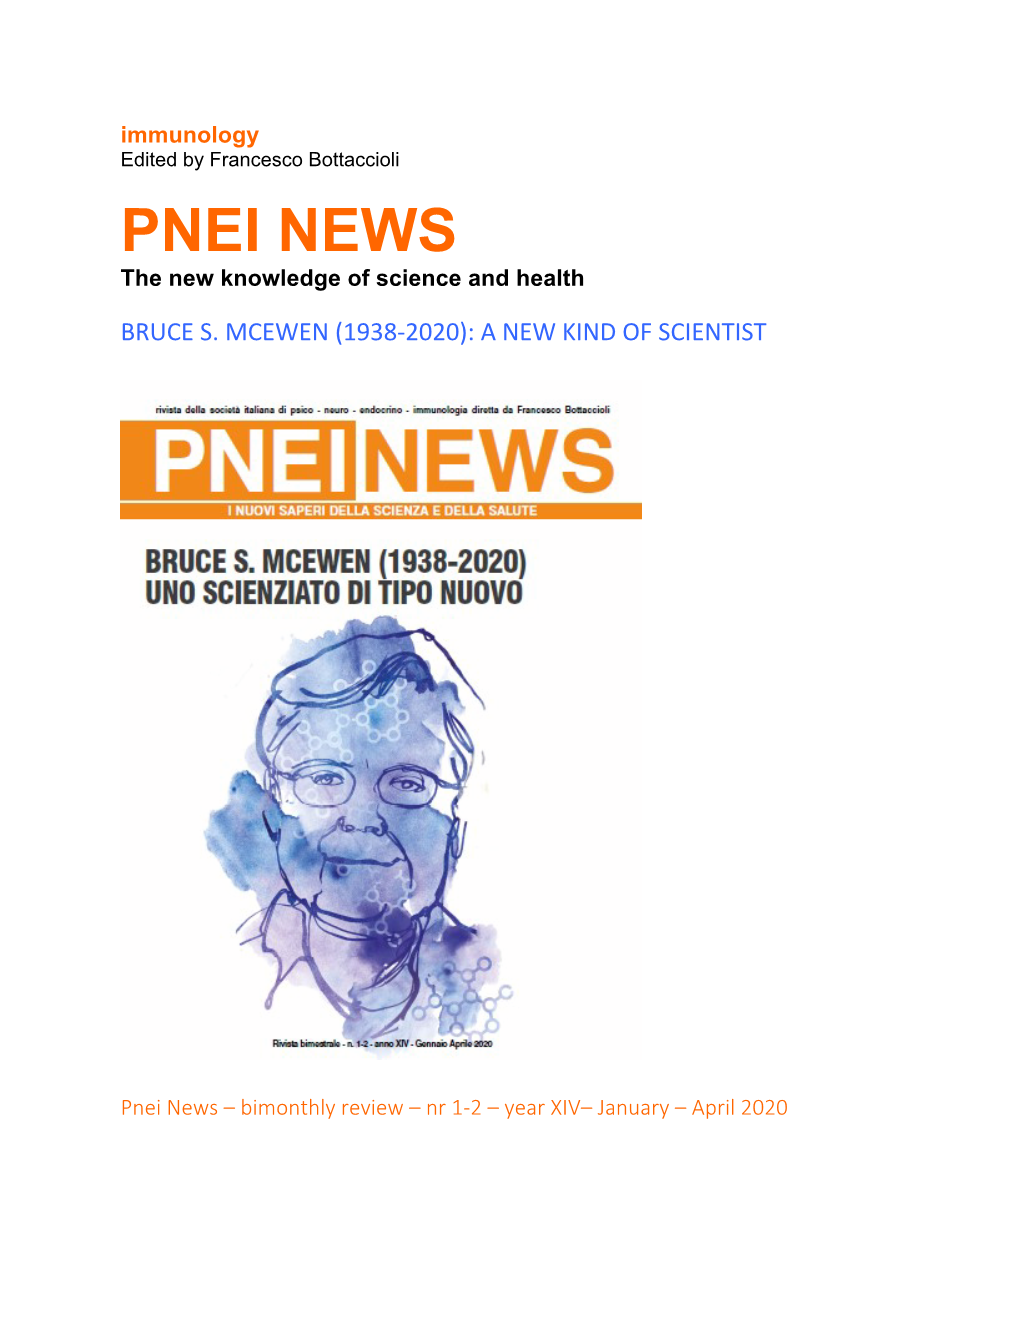 PNEI NEWS the New Knowledge of Science and Health